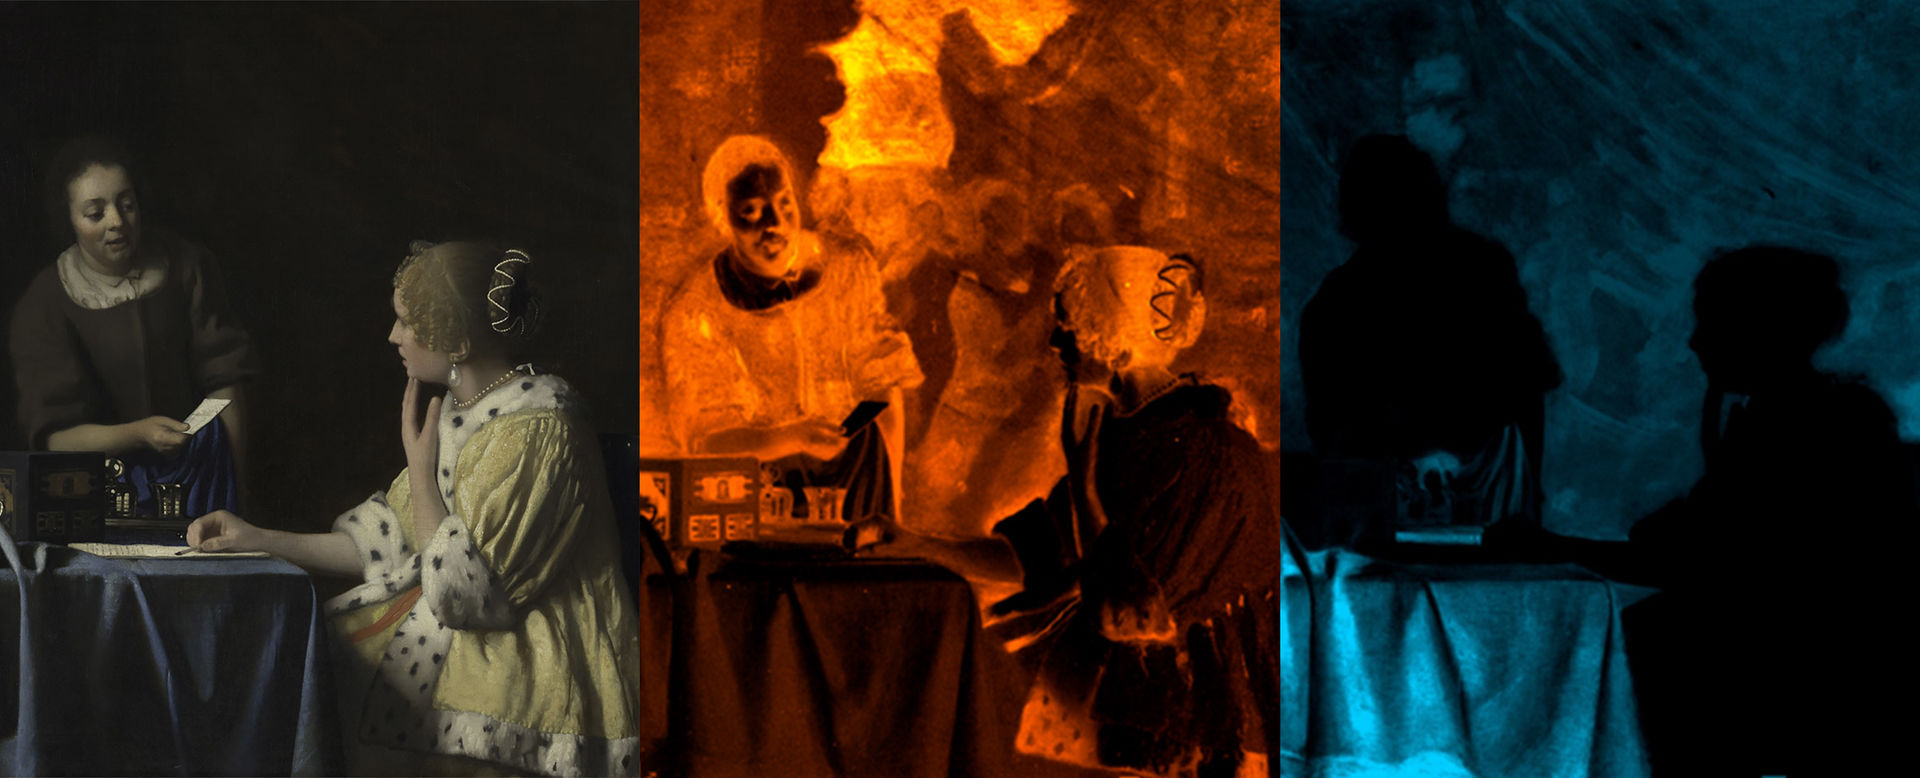 Composite image composed three side-by-side images of the same painting. The left-hand image of the painting depicts a plainly-dressed woman presenting a small piece of paper to a regally dressed woman seated at a table with pen and paper. The figures are set against an enigmatic dark background. The middle image is an x-ray image of the painting renders the image in a range of white, bright orange and black values. The right-hand image is also an x-ray but renders the painted image in rand of white, florescent blue, and black. The figures are silhouetted and the table cloth and background contain highlights.